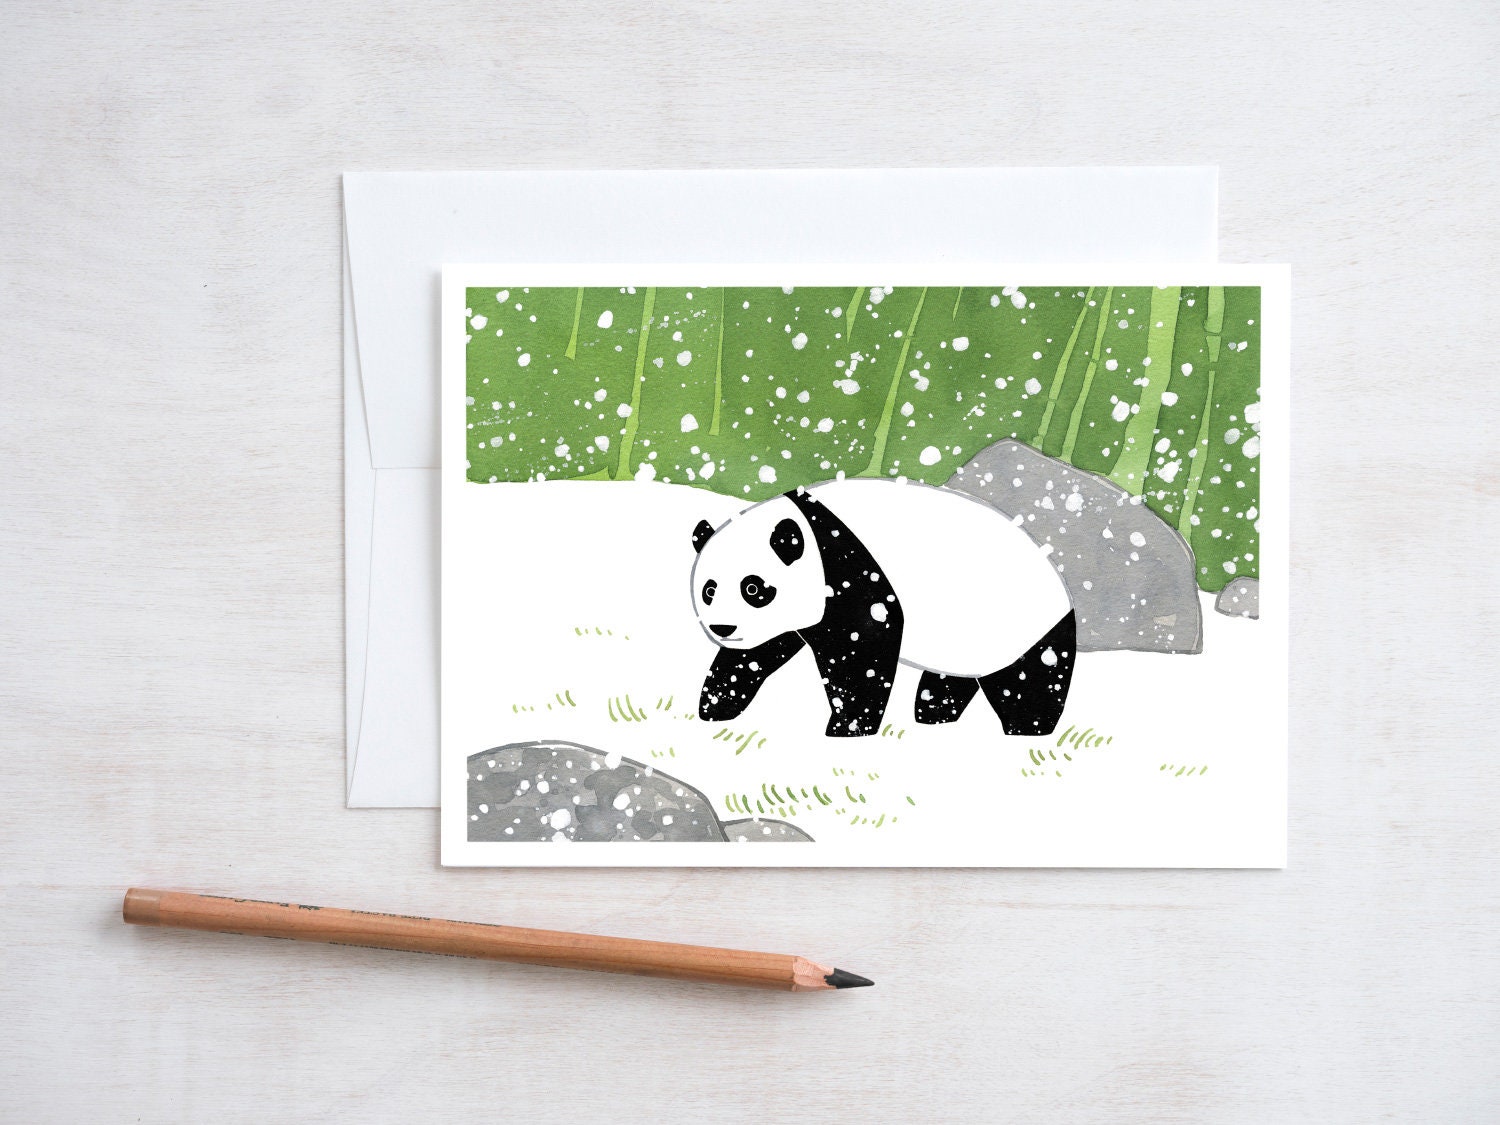 Panda Winter Card Pack, Winter Holiday and Christmas Stationery